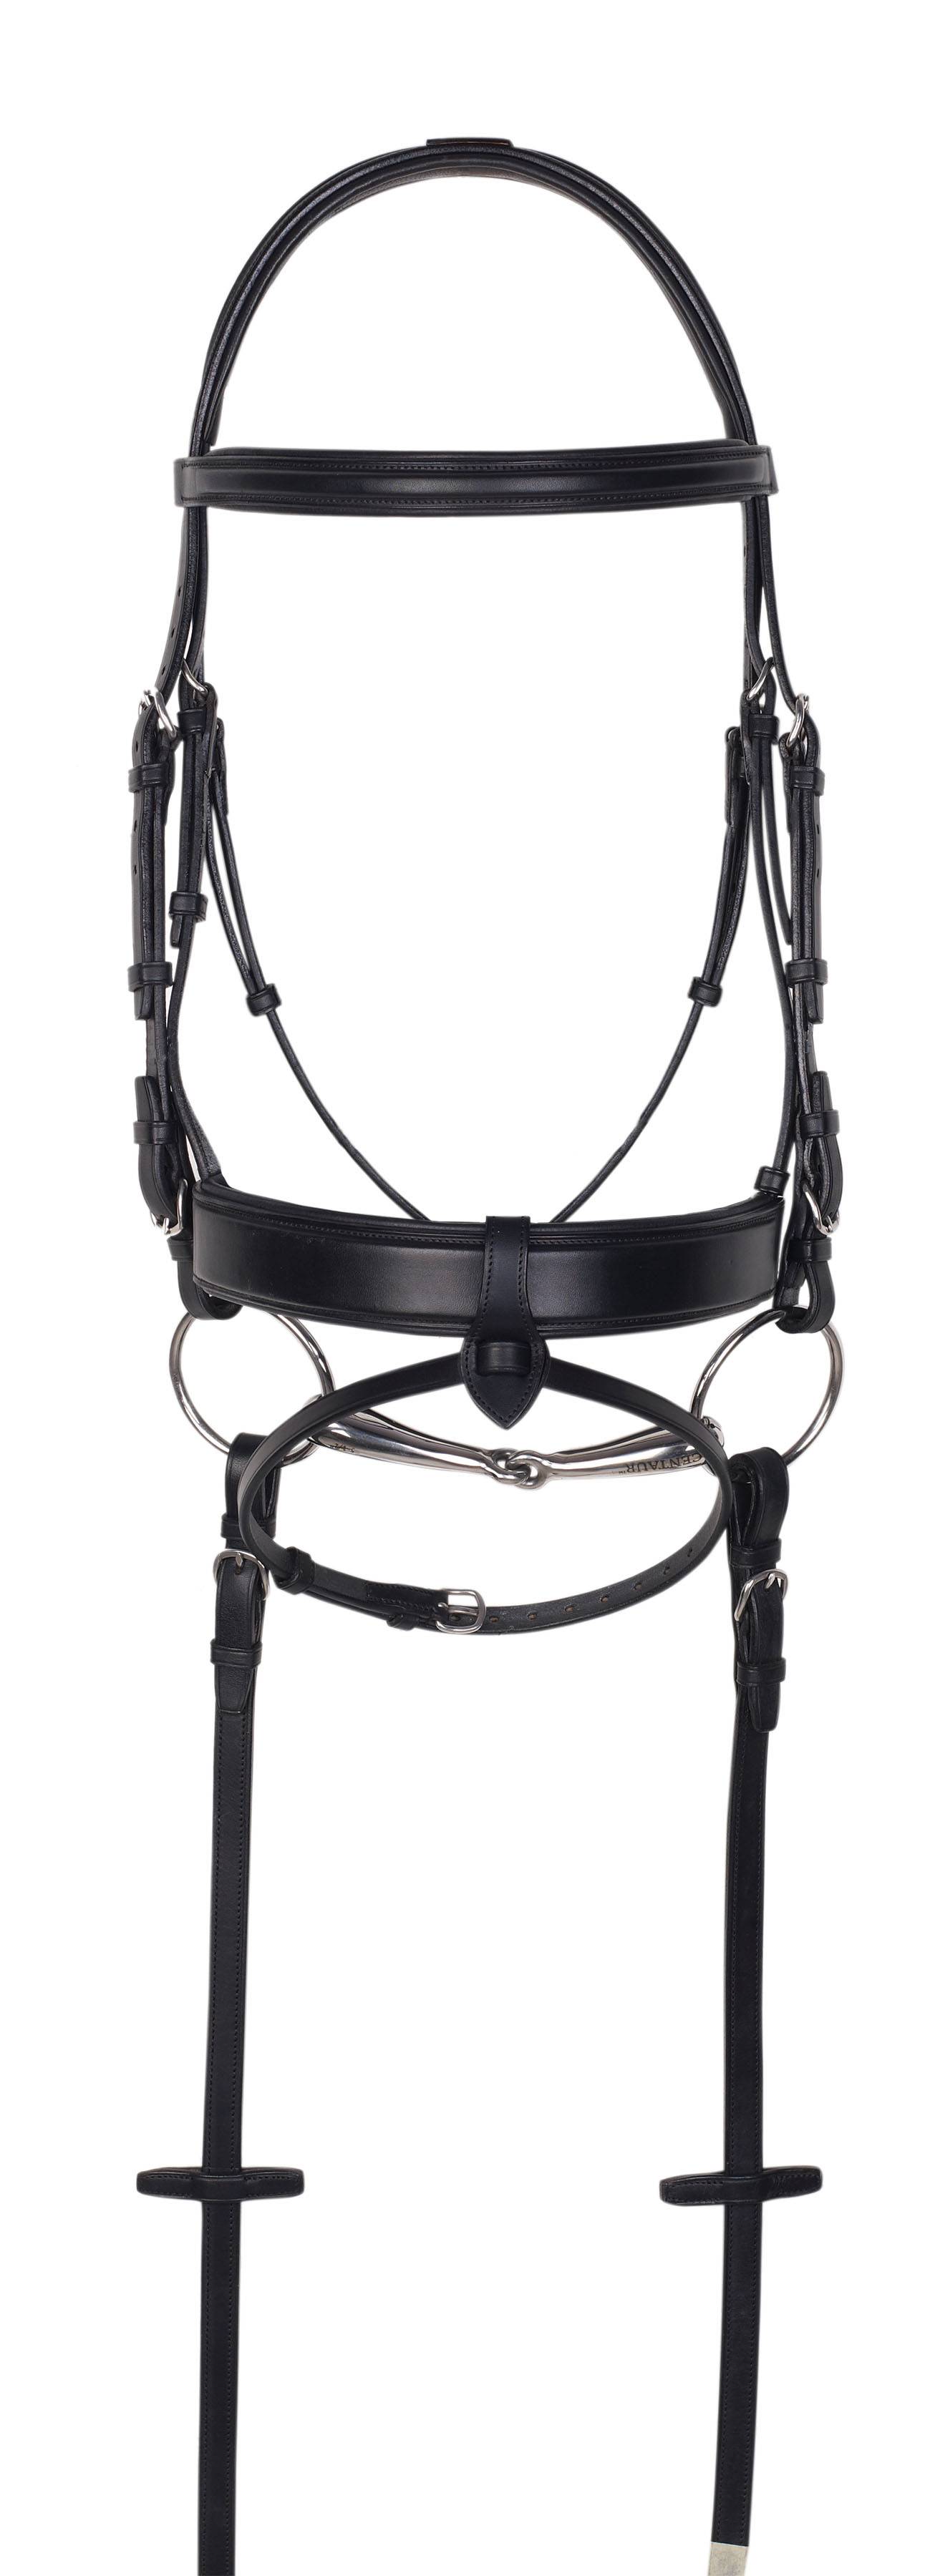 Aramas Square Mild Raised Wide Dressage Bridle with Leather Reins